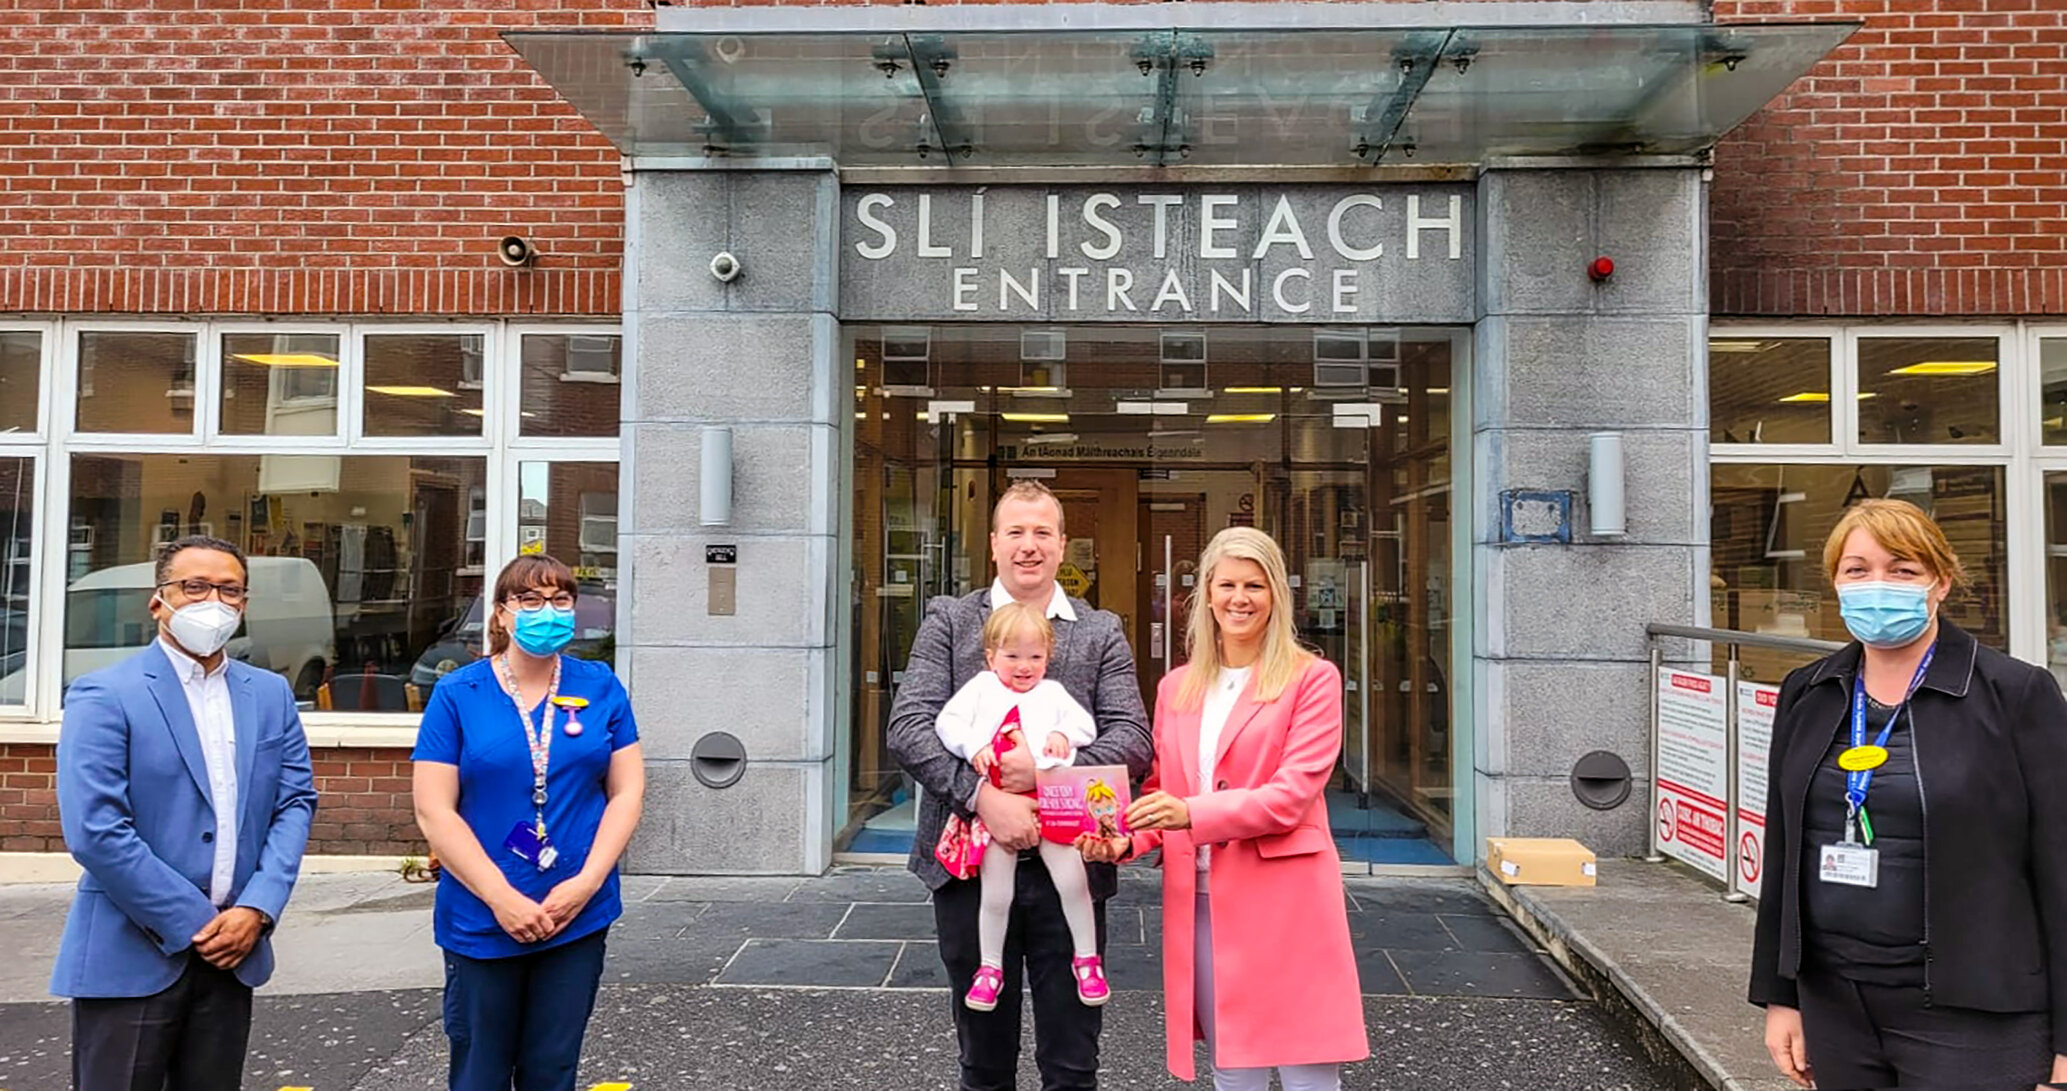 Mark & Lisa Blennerhassett with baby Ella at the maternity hospital pictured with Professor Roy Philip, Denise Dempsey CMM1, Deirdre O’ Connell CMM3